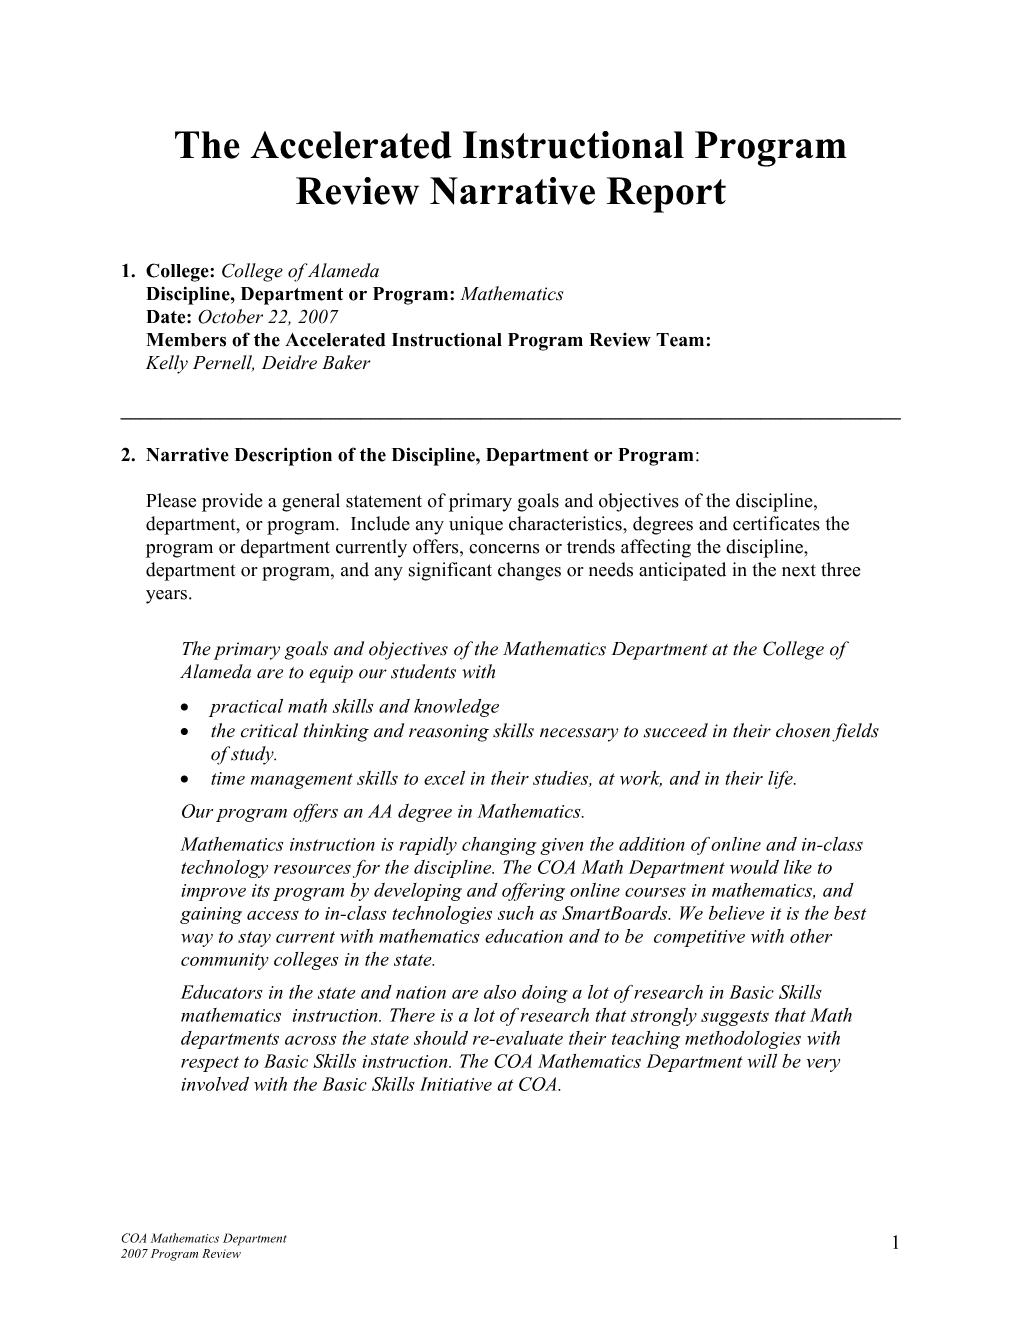 The Accelerated Instructional Program Review Narrative Report s1